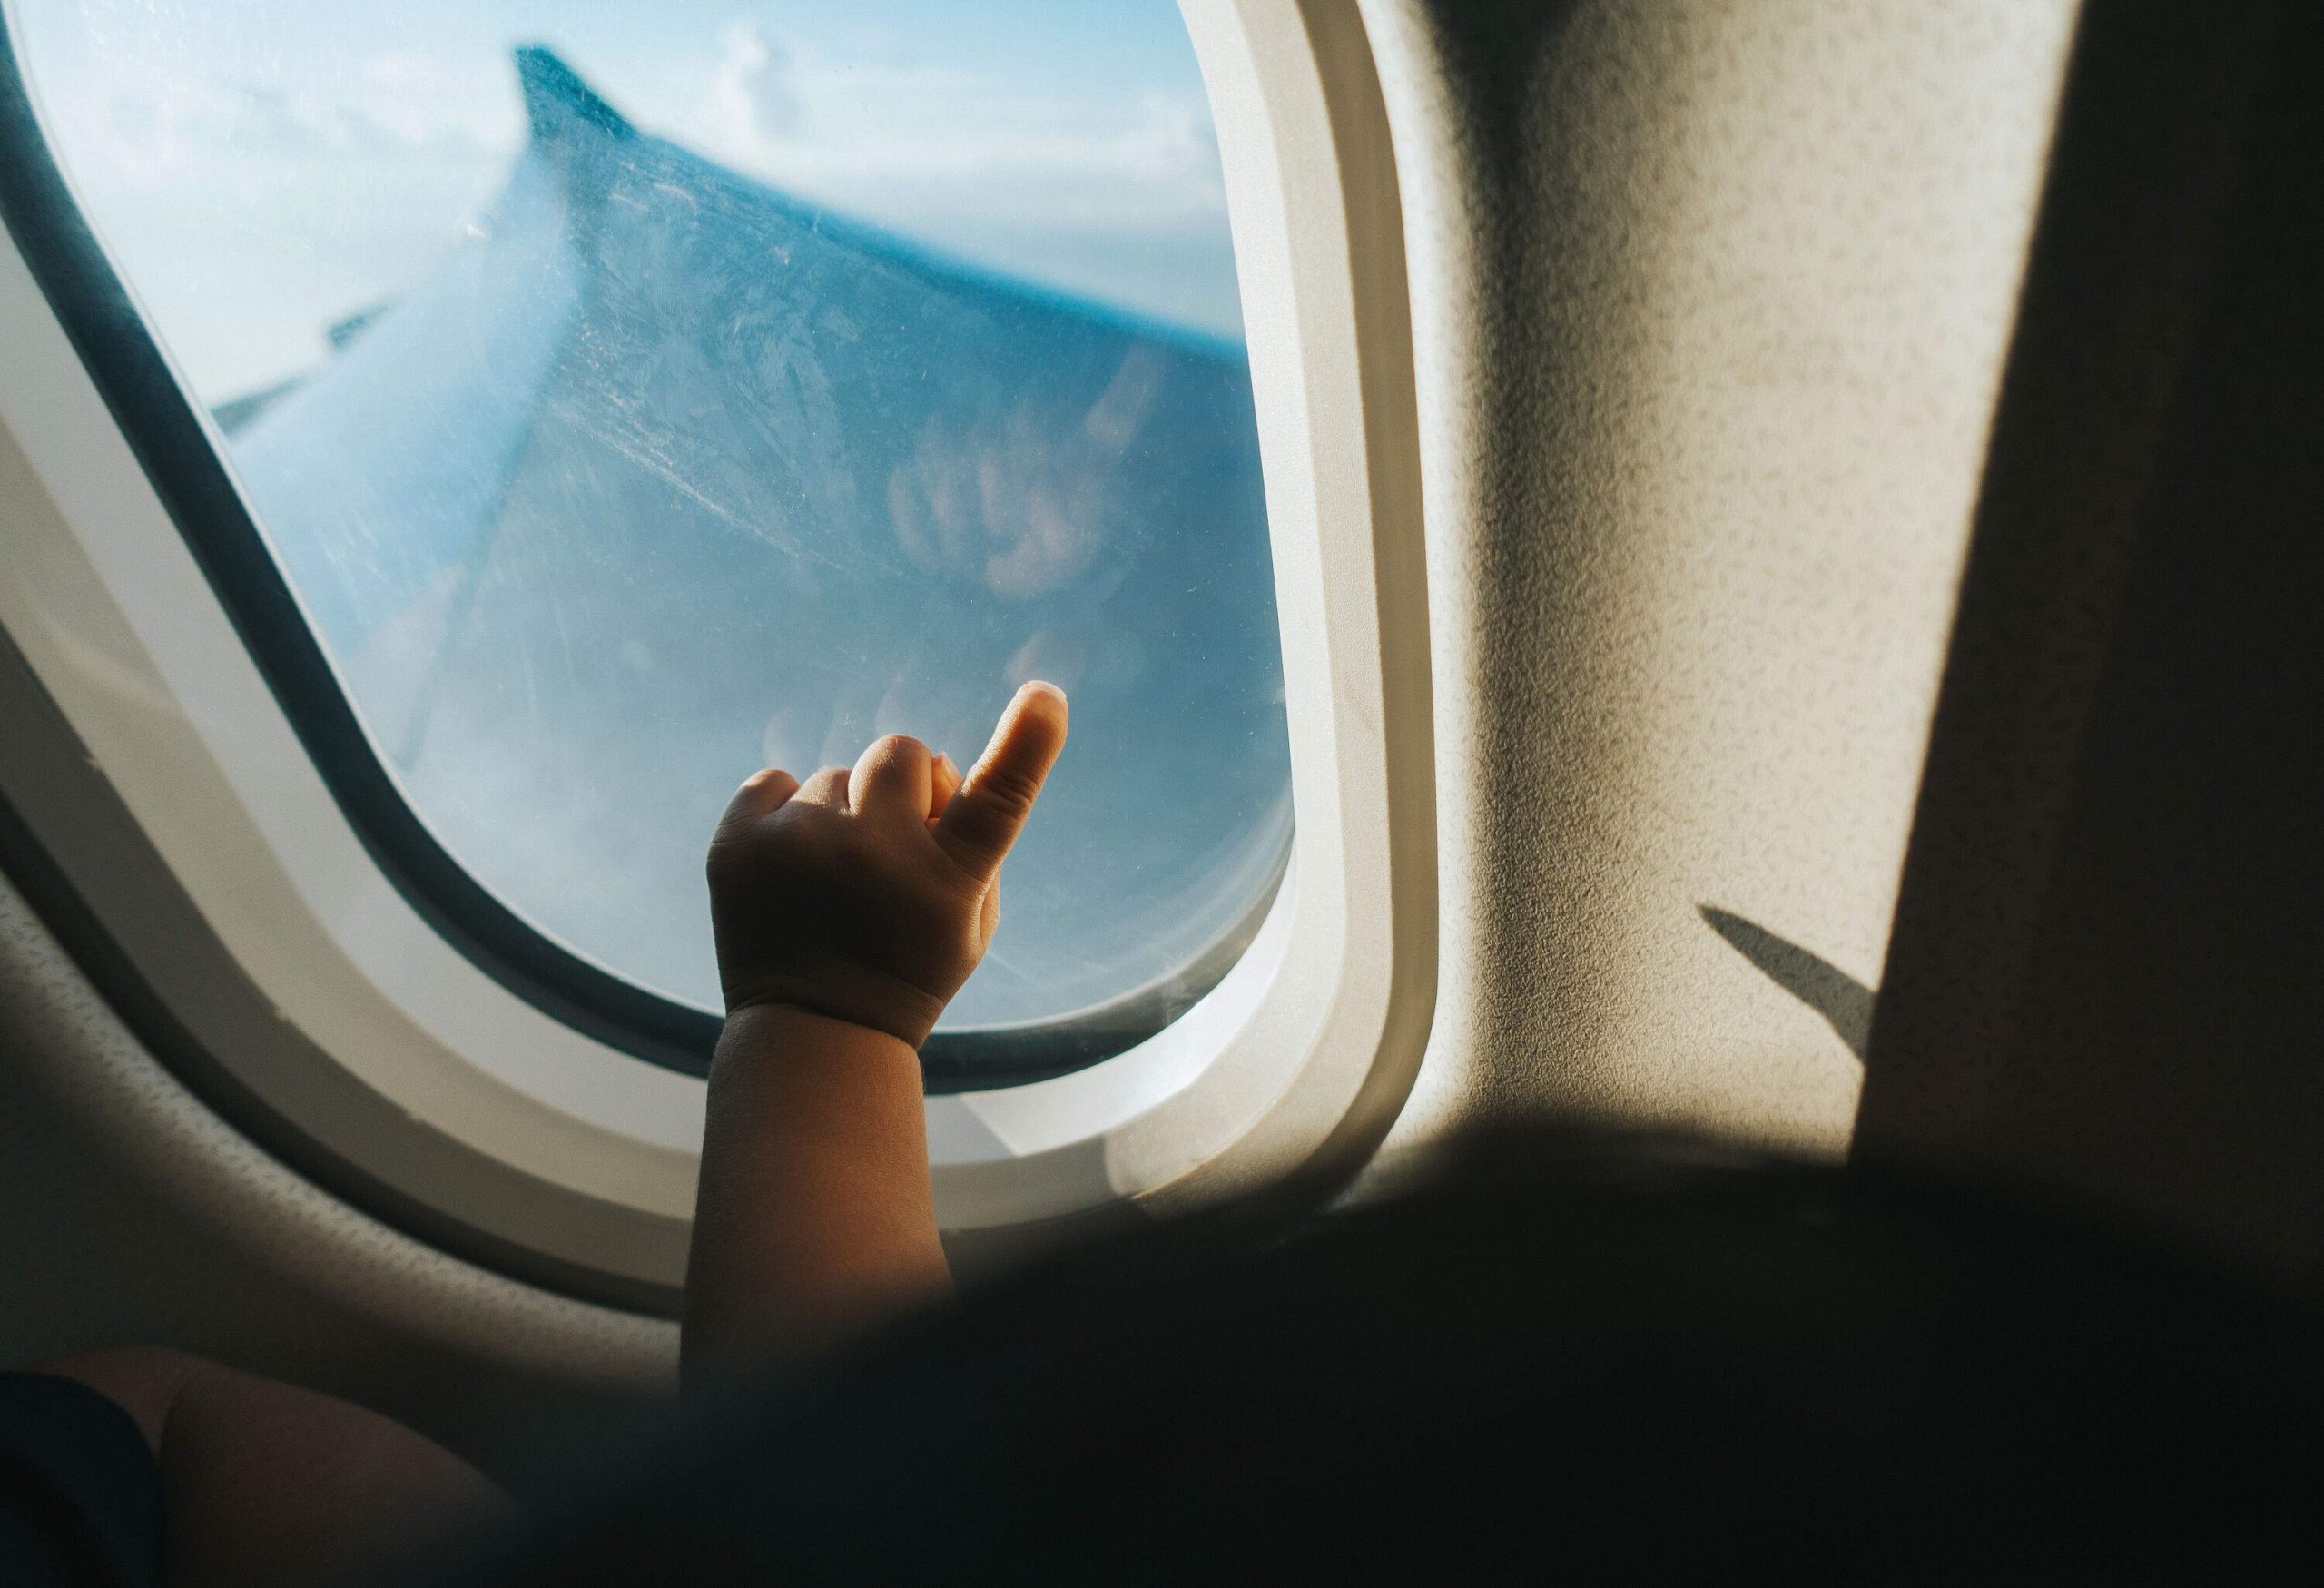 A toddler points at an aeroplane window with a view of a cloudy blue sky.